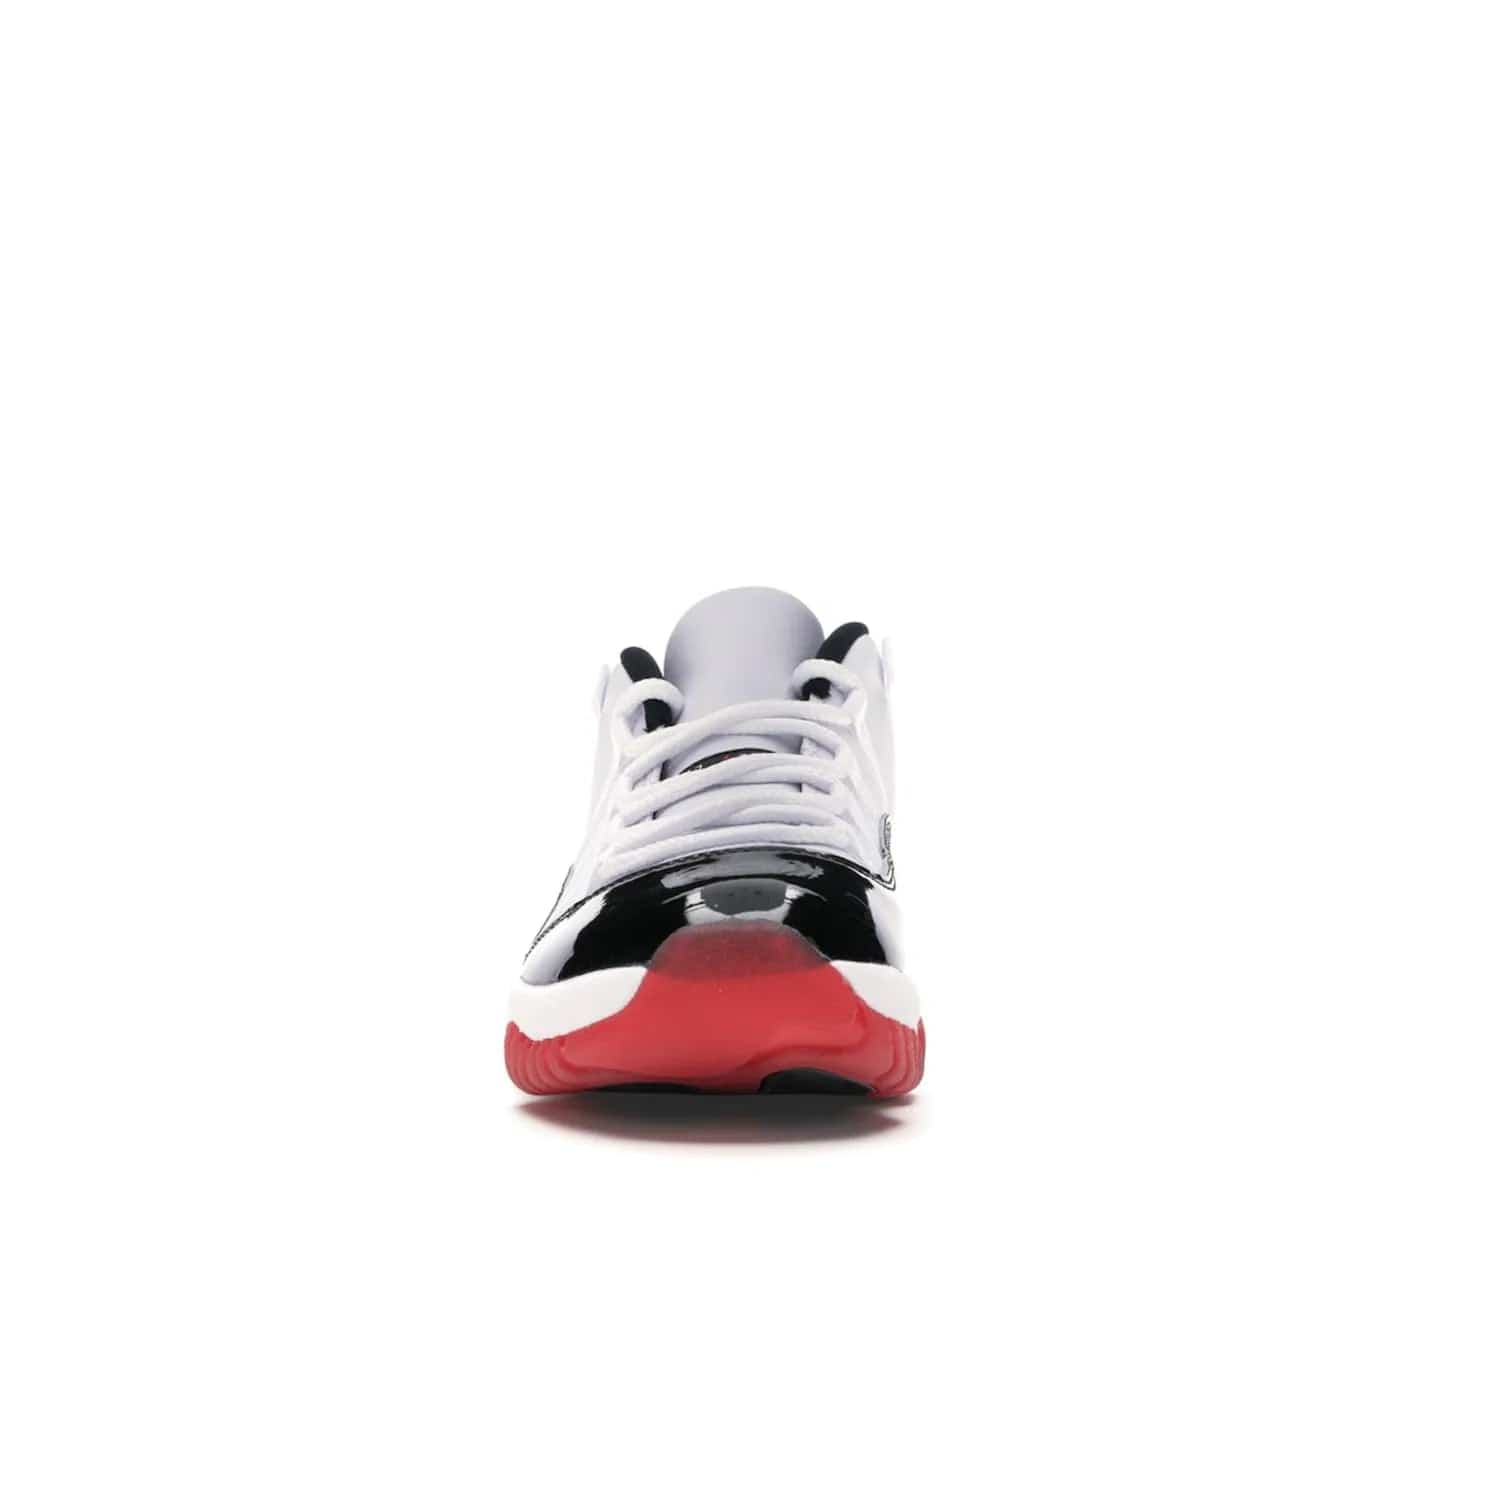 Jordan 11 Retro Low Concord Bred - Image 10 - Only at www.BallersClubKickz.com - Grab the classic Jordan 11 look with the Jordan 11 Retro Low Concord Bred. With white and black elements and the iconic red outsole of the Jordan 11 Bred, you won't miss a beat. Released in June 2020, the perfect complement to any outfit.